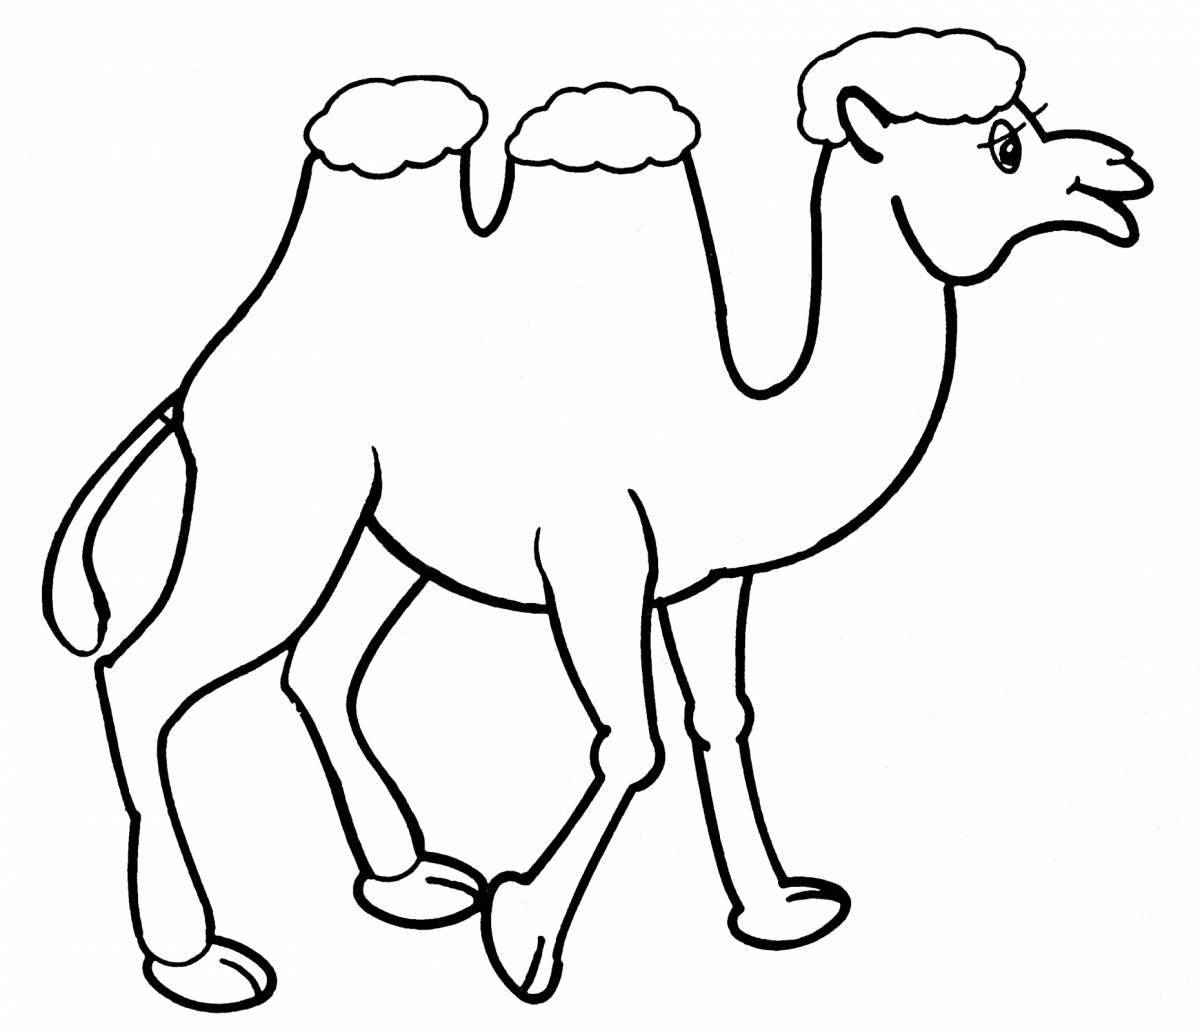 Colorful coloring camel for children 6-7 years old